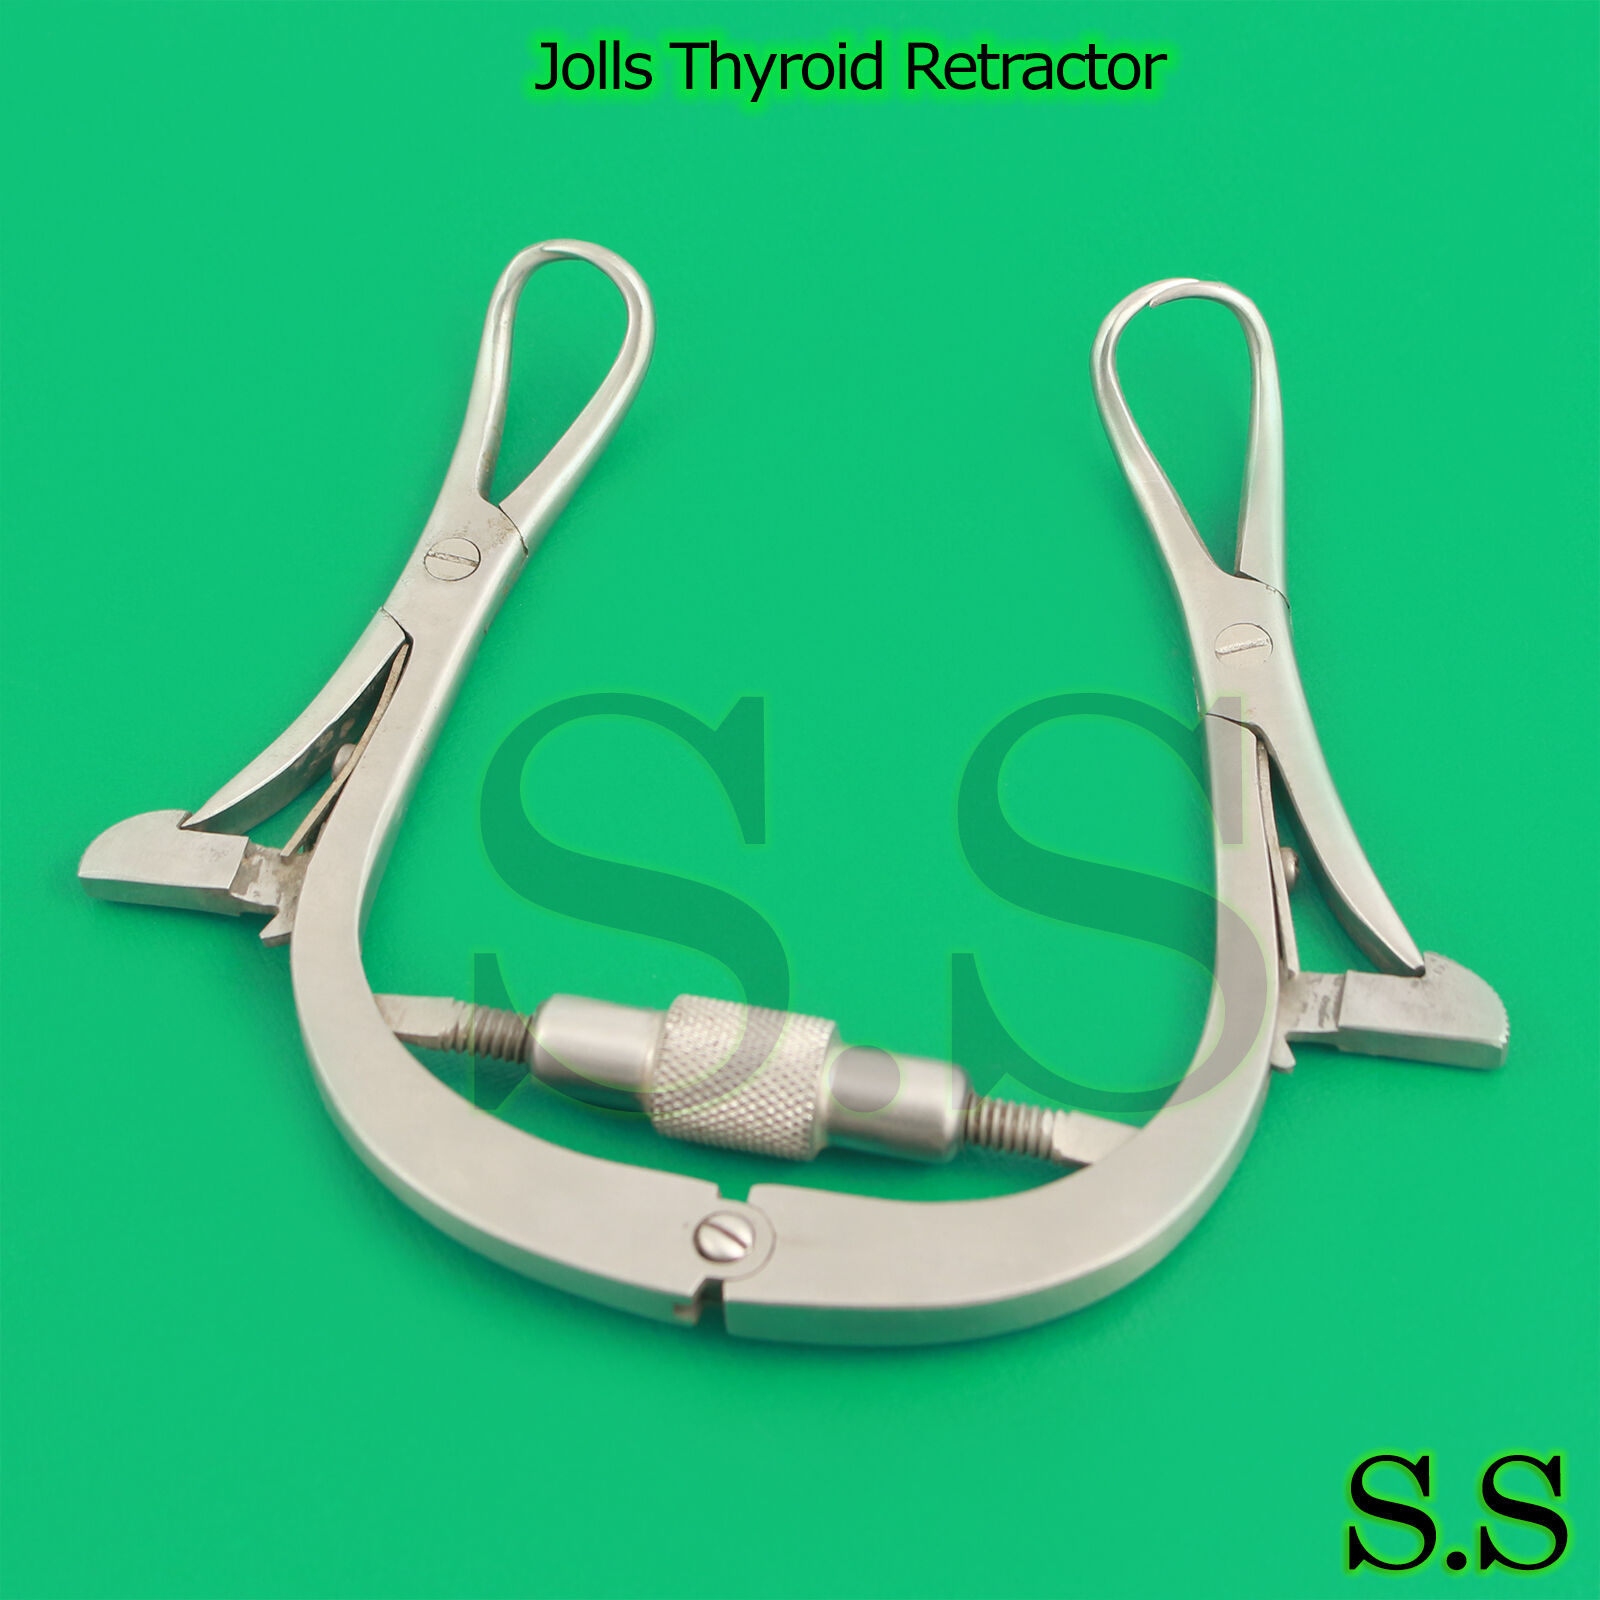 Jolls Thyroid Retractor Detroit Mall Instruments New products world's highest quality popular Surgical